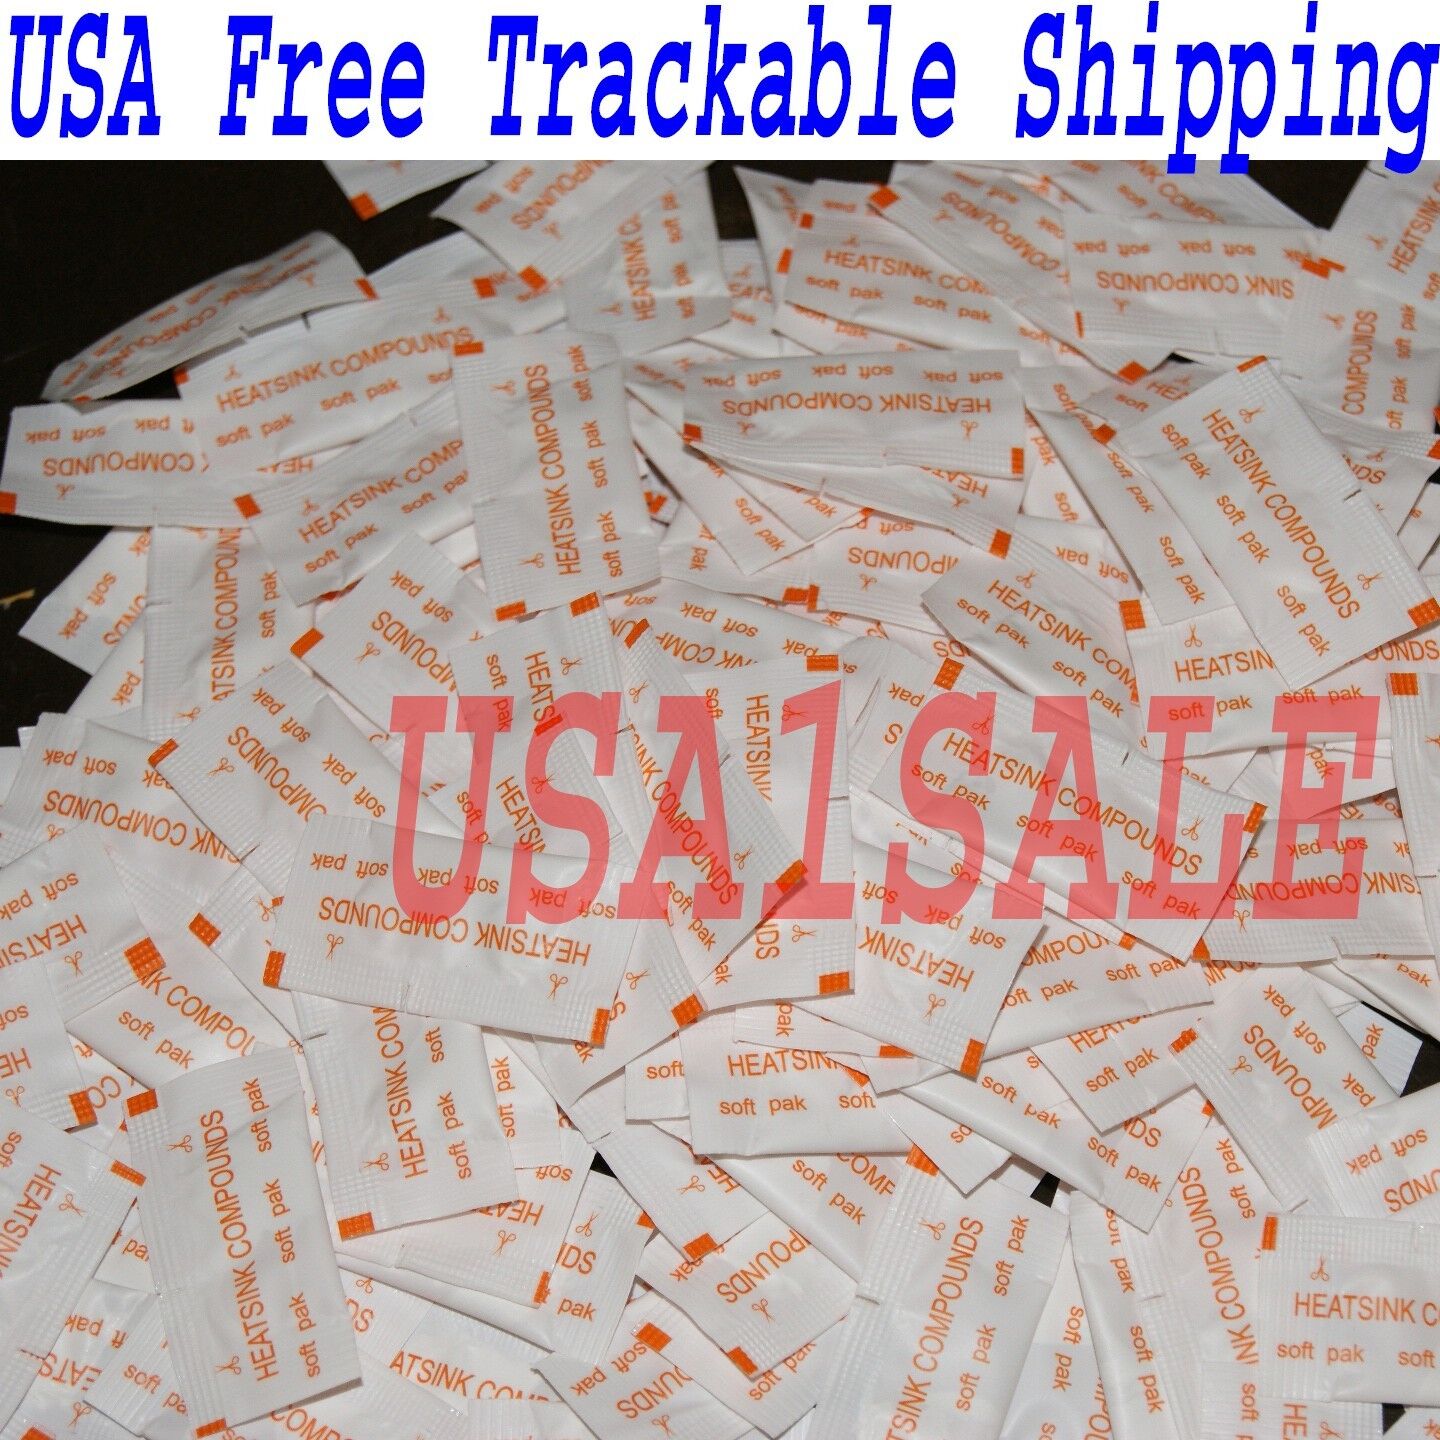 Lot of 100 pcs White Heatsink Compounds Thermal Paste Grease USA  √